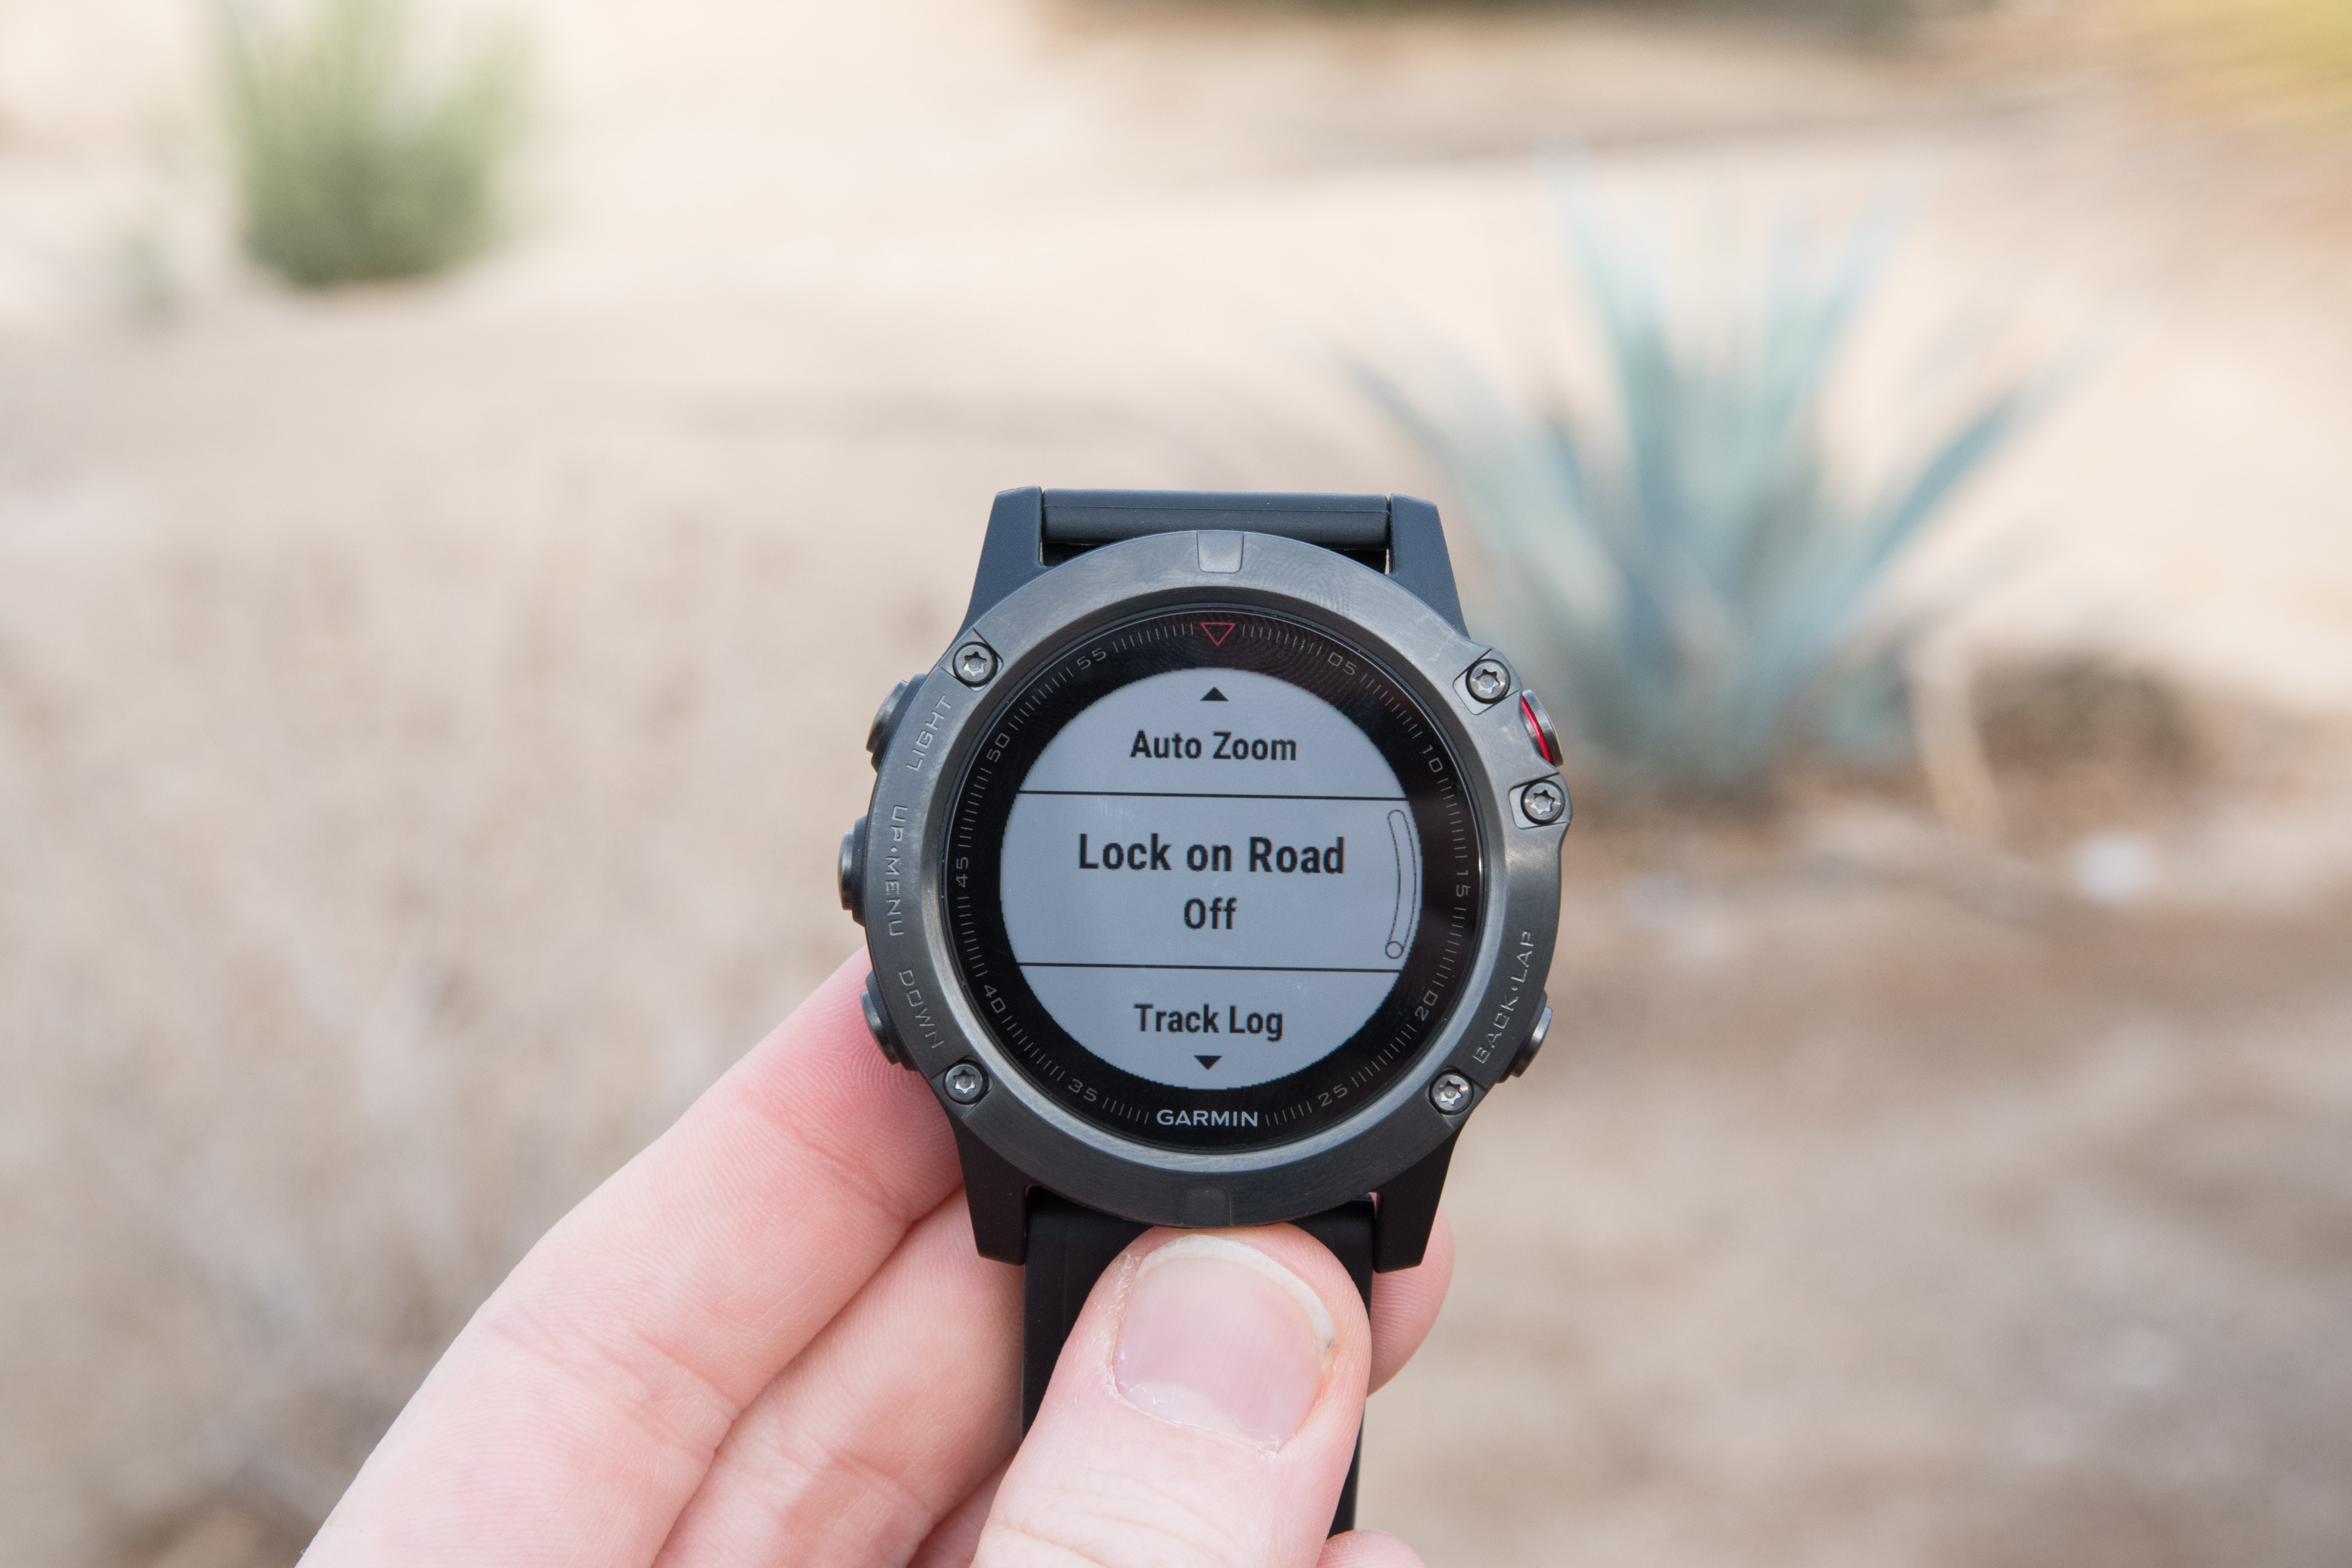 Hands-on: Garmin’s New Fenix 5 Multisport GPS Series–with mapping! | DC